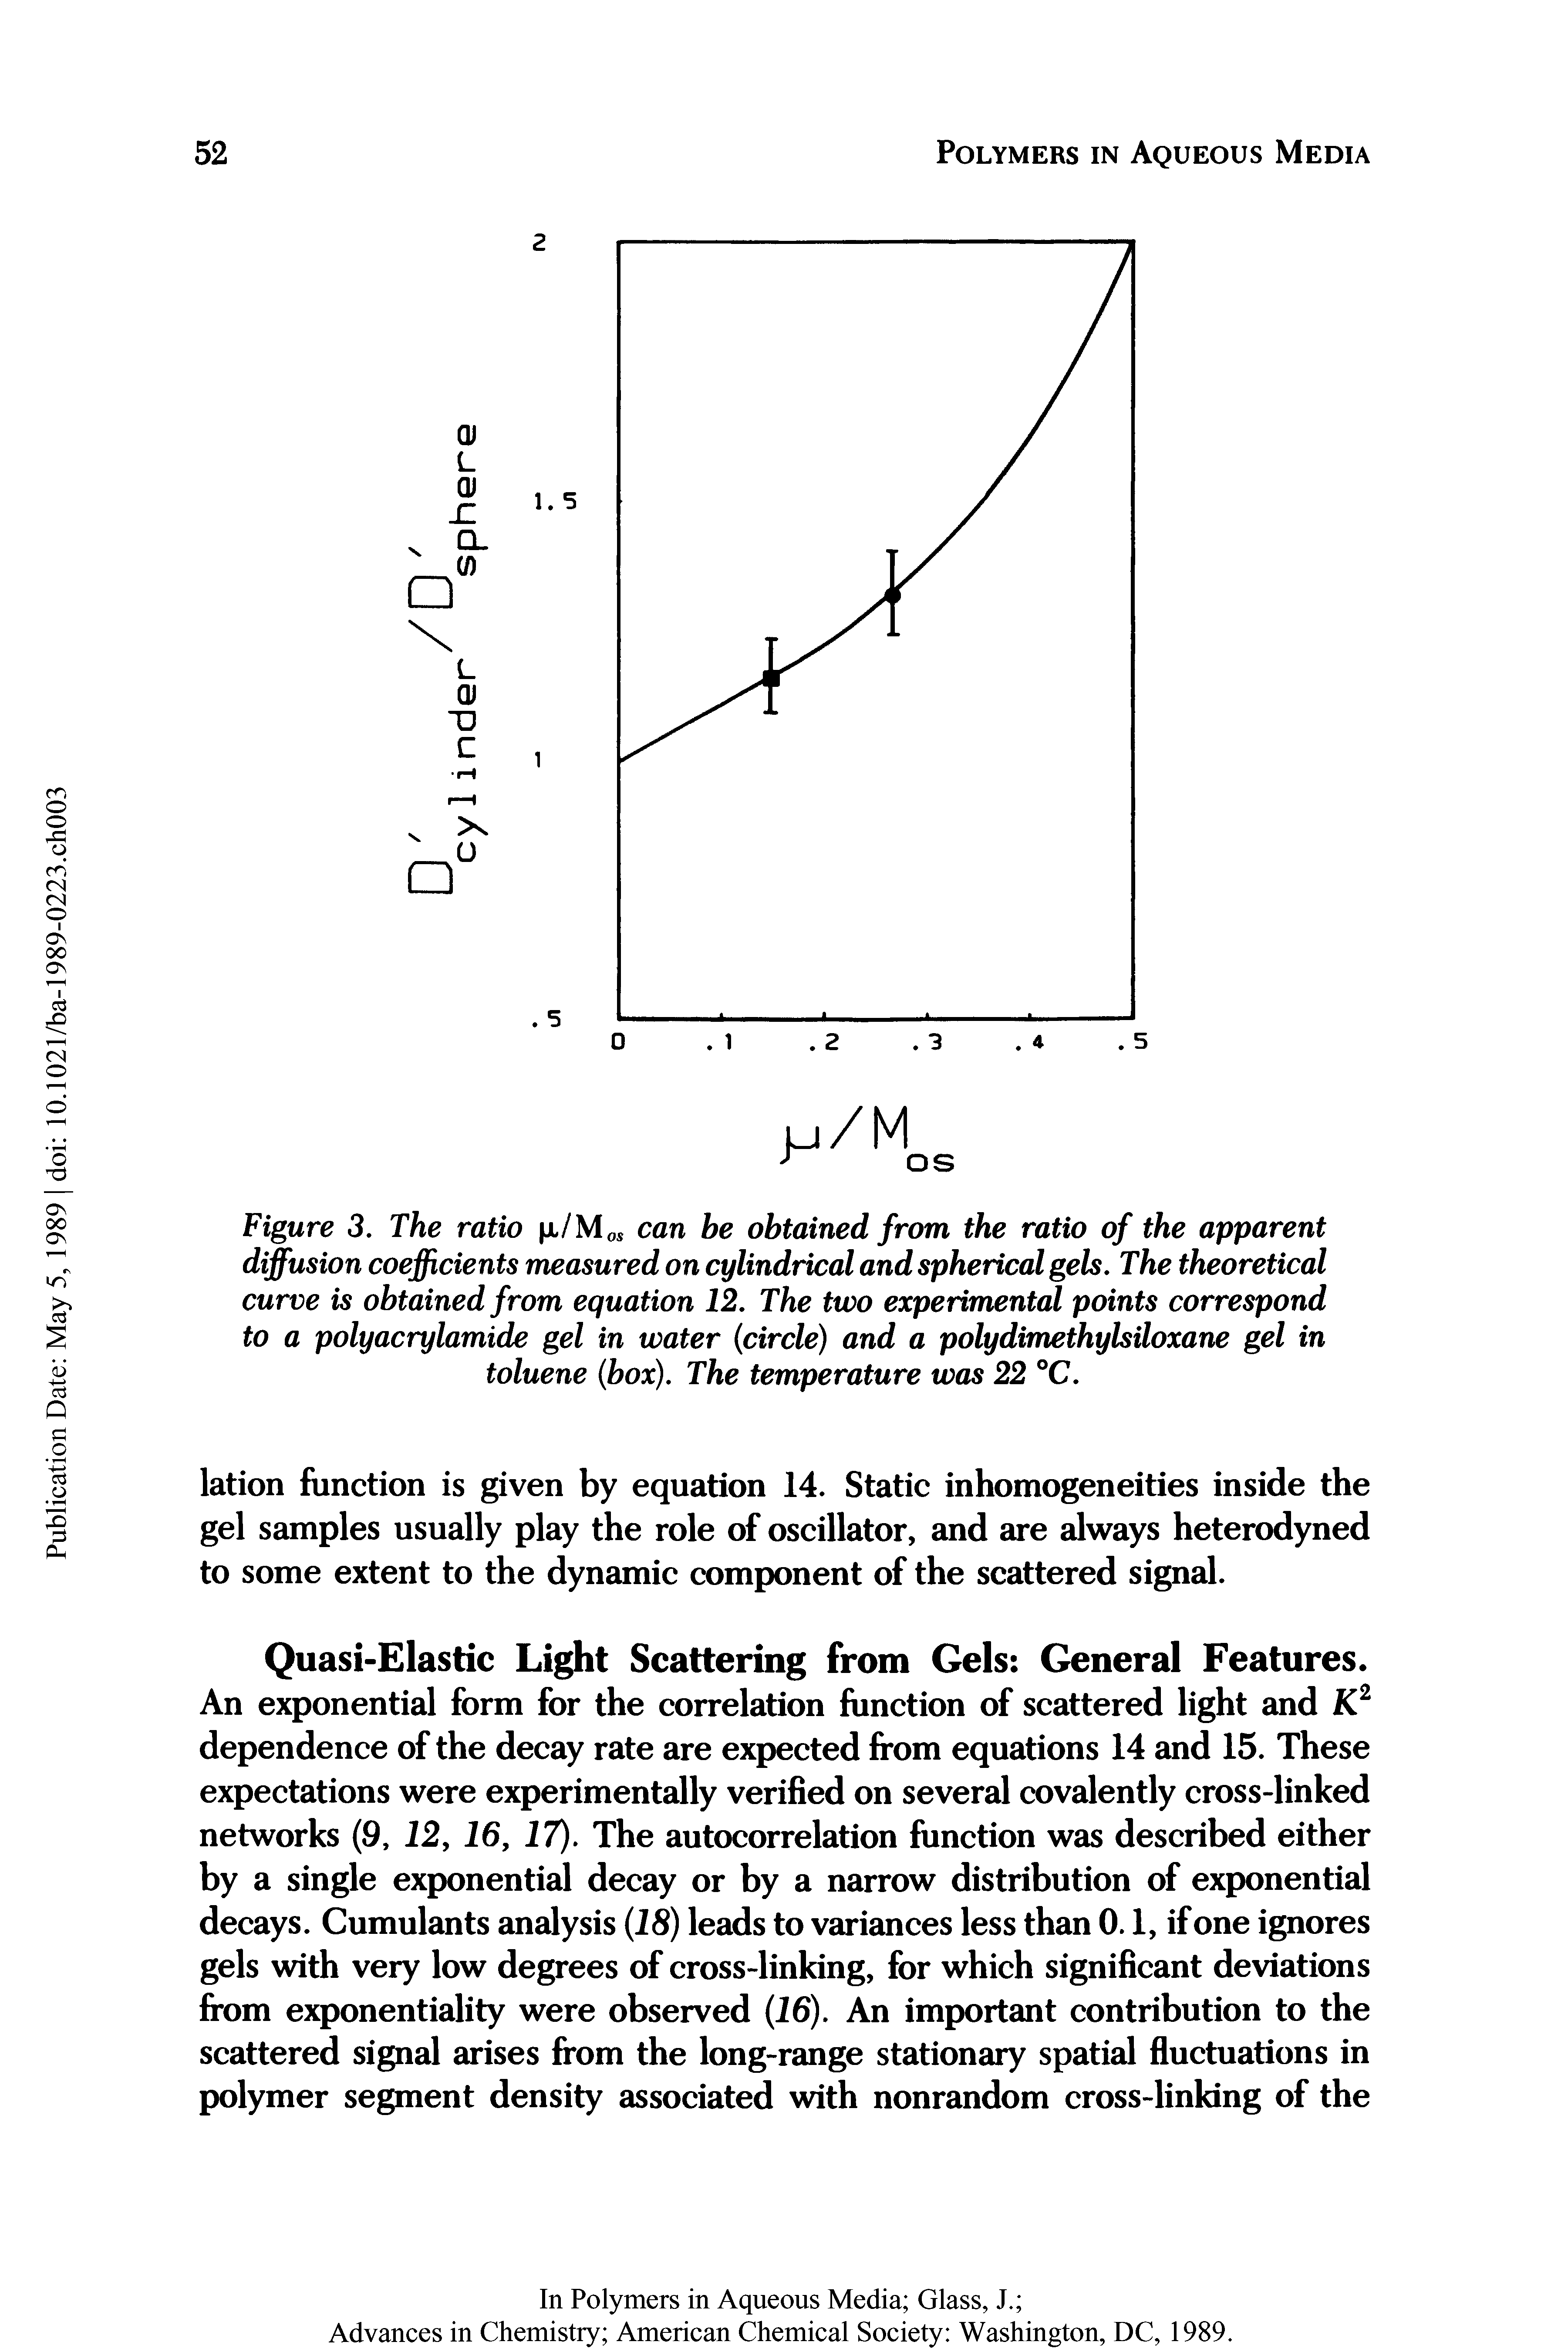 Figure 3. The ratio jx/Mo can be obtained from the ratio of the apparent diffusion coefficients measured on cylindrical and spherical gels. The theoretical curve is obtained from equation 12. The two experimental points correspond to a polyacrylamide gel in water (circle) and a polydimethylsiloxane gel in toluene (box). The temperature was 22 °C.